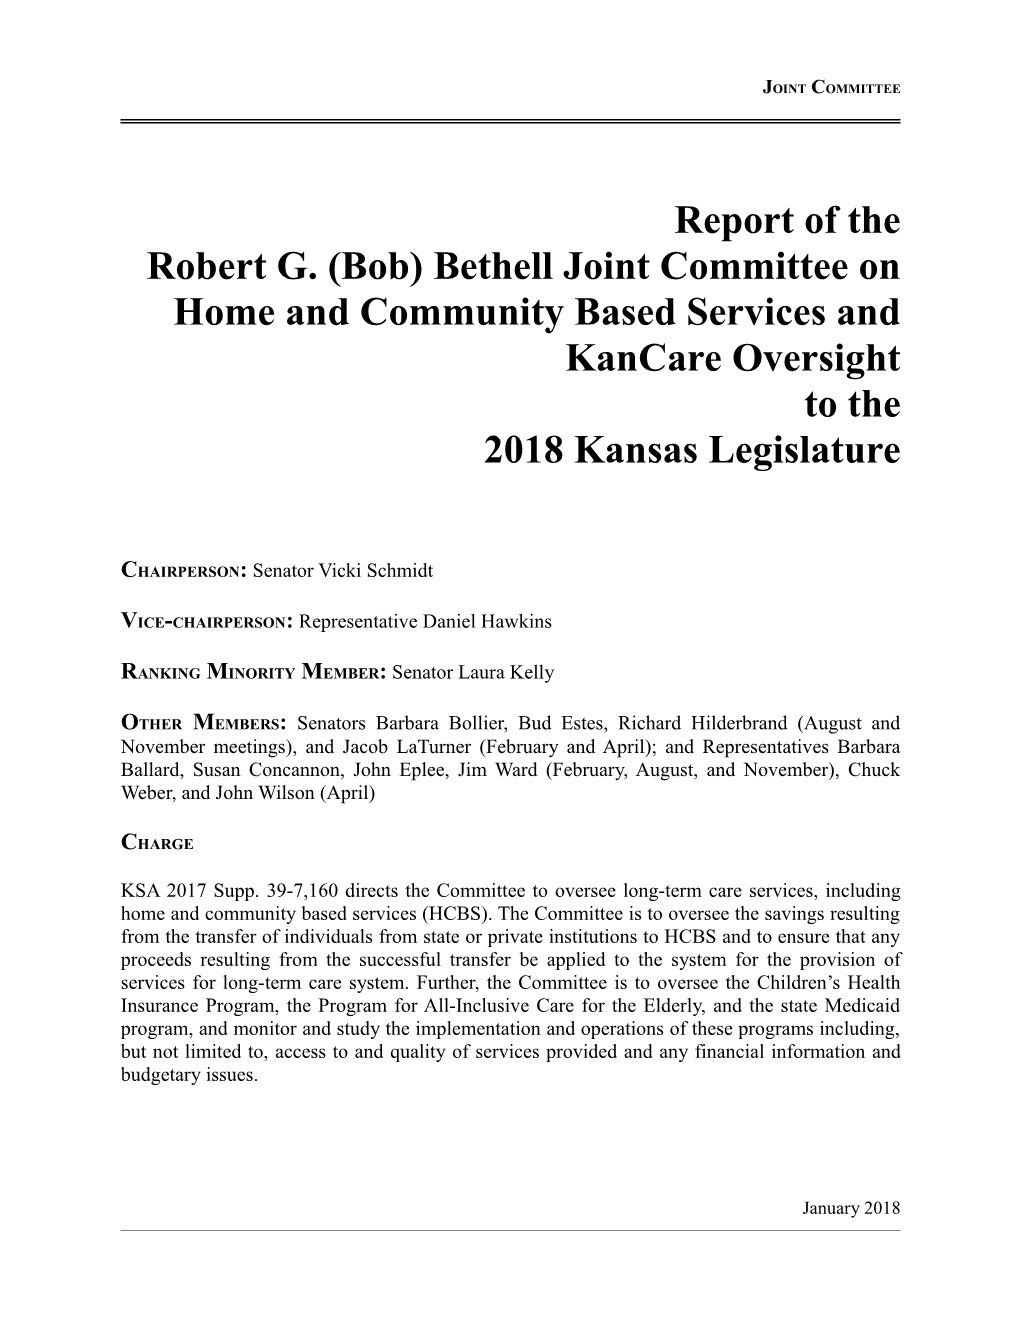 Report of the Robert G. (Bob) Bethell Joint Committee on Home and Community Based Services and Kancare Oversight to the 2018 Kansas Legislature